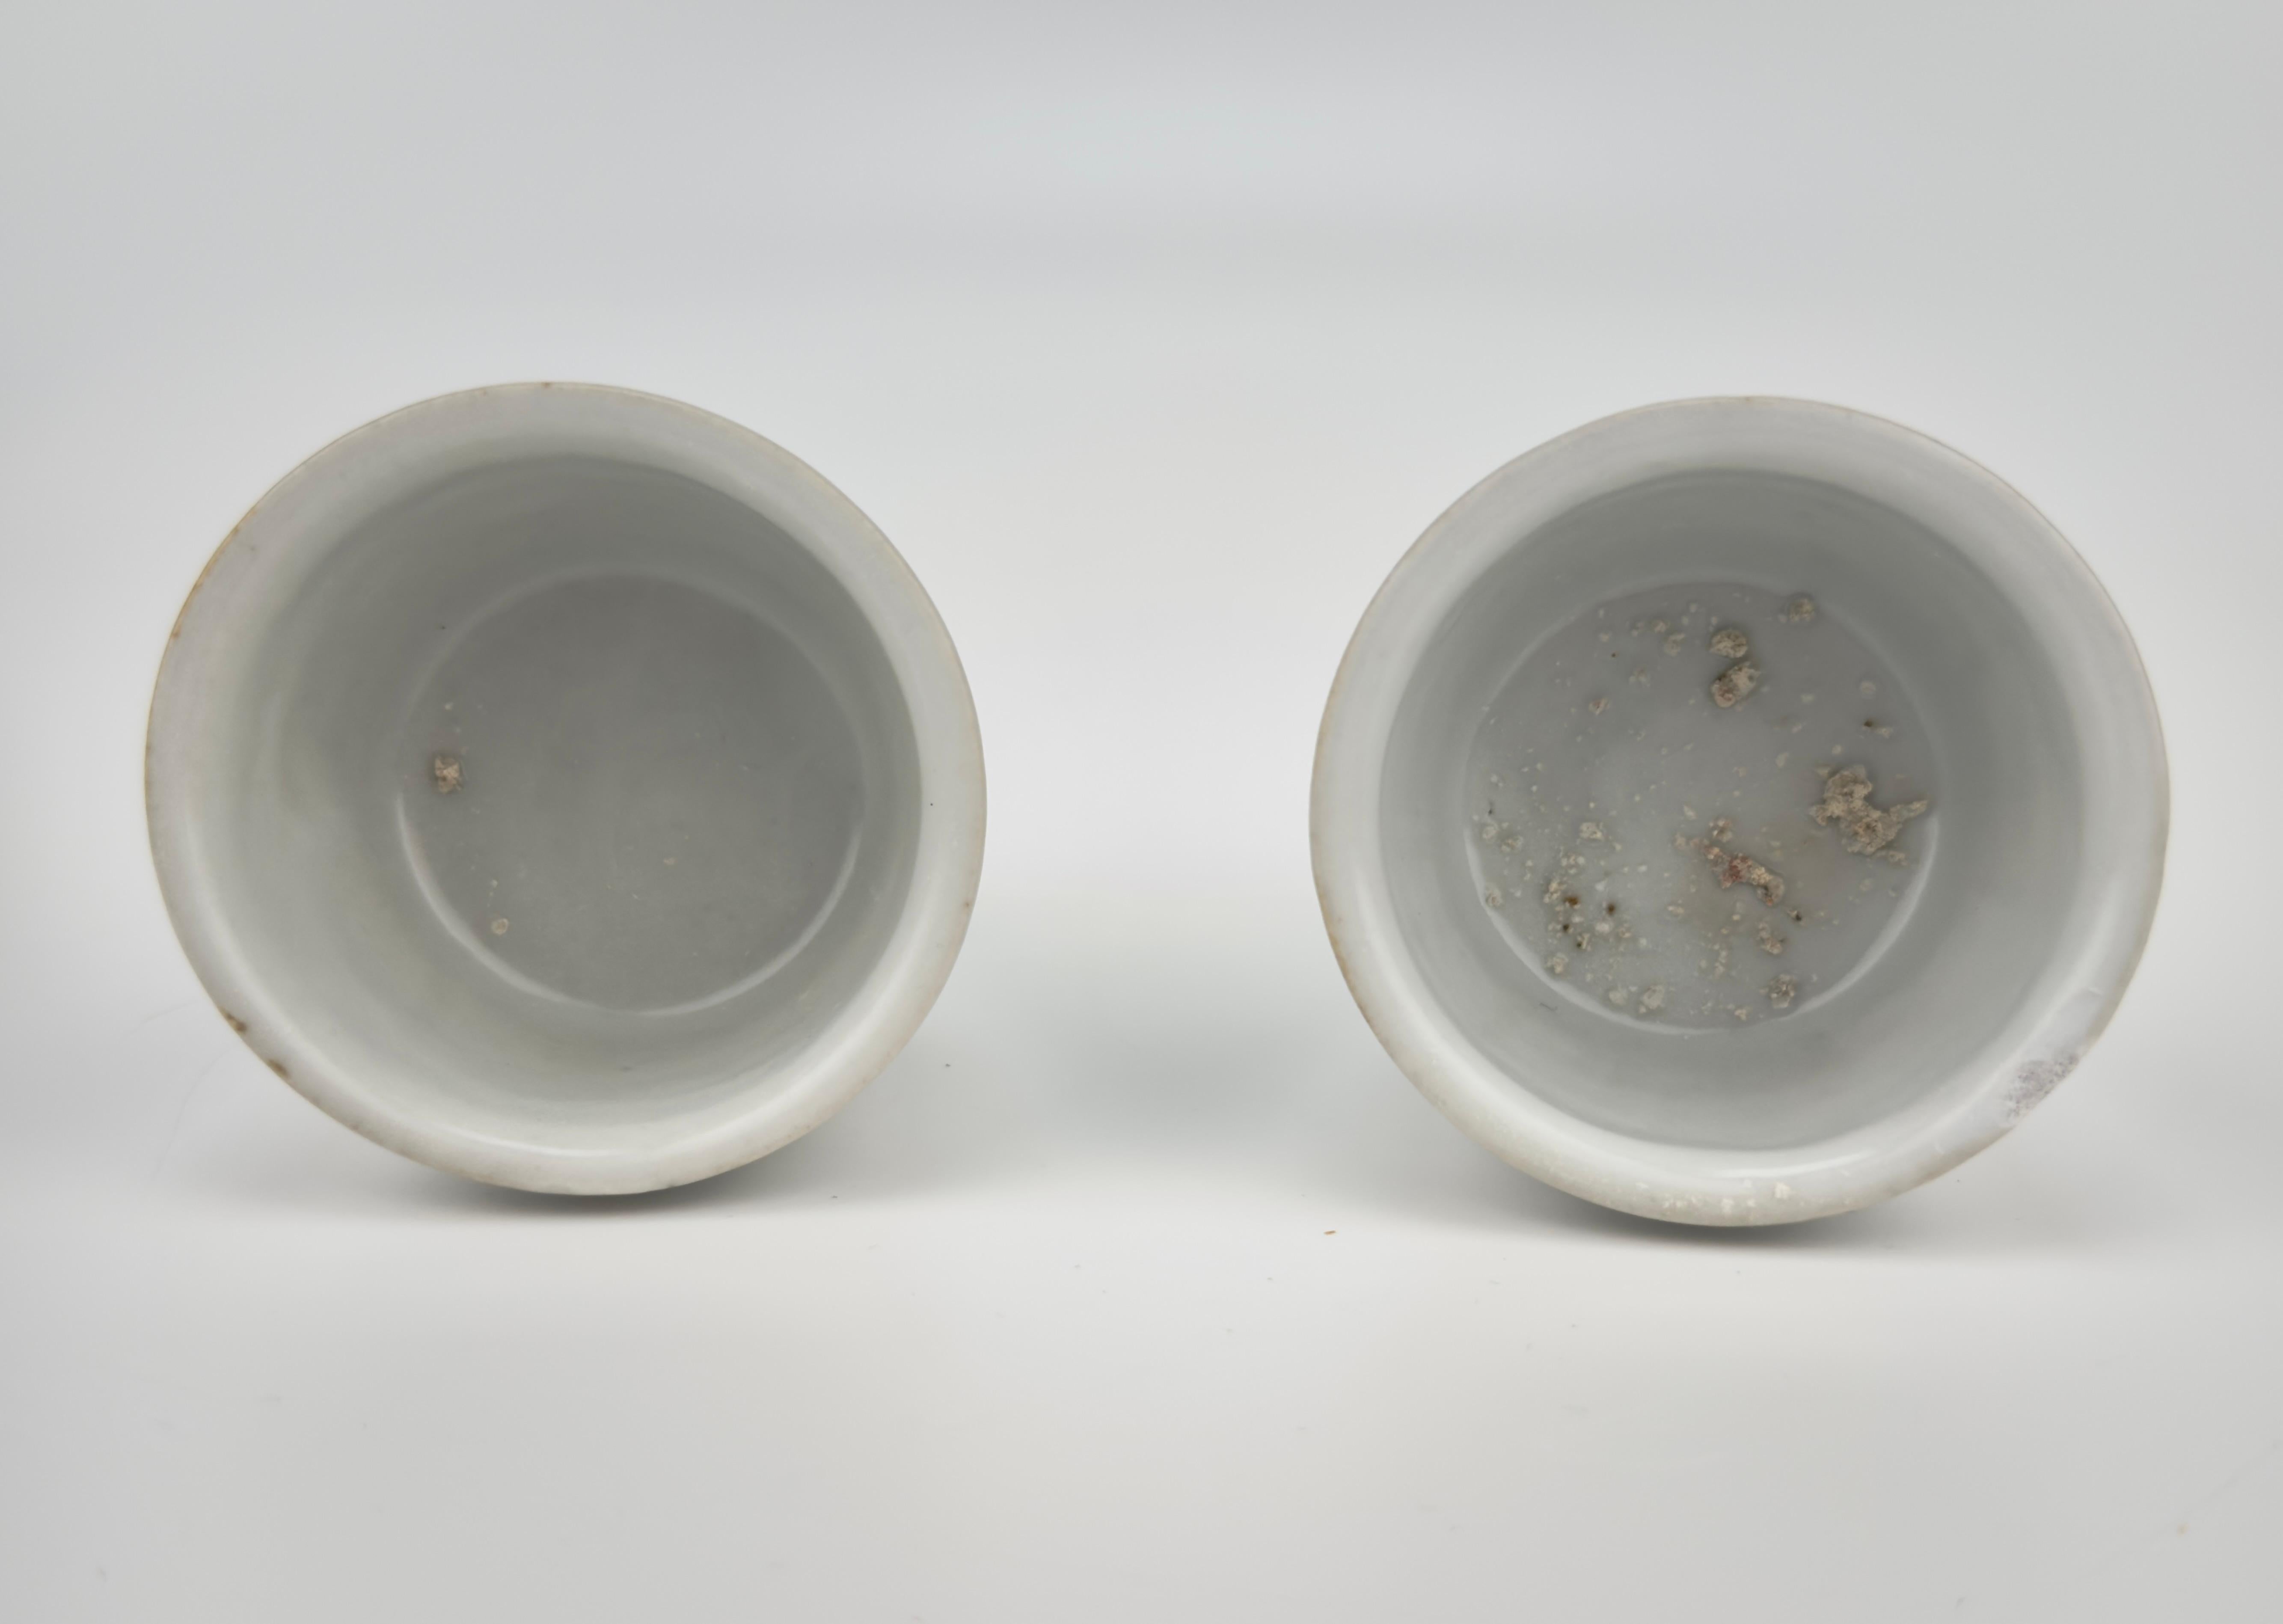 Pair of Small White porcelain Cup, Late Ming Era(16-17th Century) For Sale 1